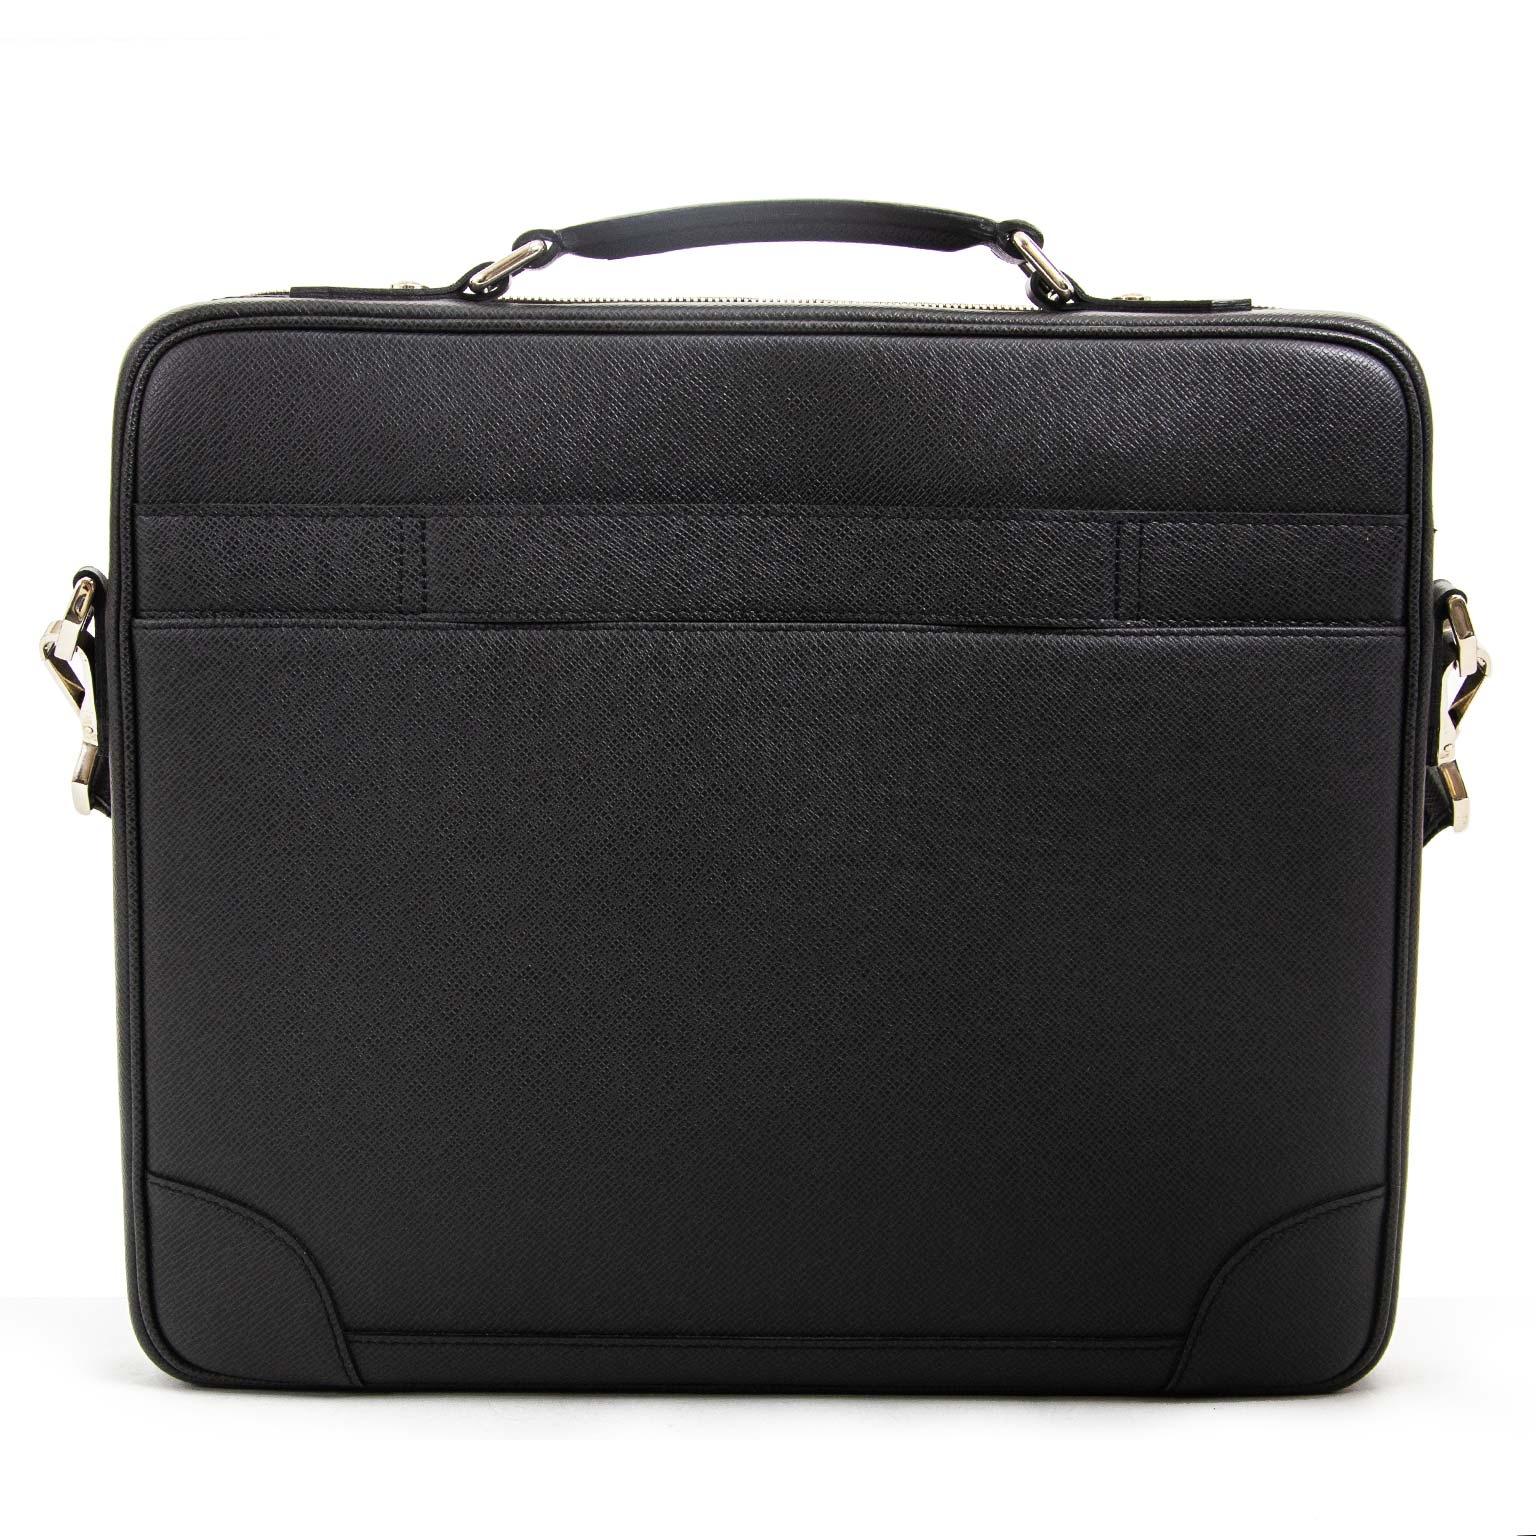 Very good condition

Louis Vuitton Black Taiga Leather Odessa Computer Case Bag

This practical Louis Vuitton computer bag is crafted in black taiga leather and features silver-tone hardware.
The bag has an adjustable and detachable shoulder strap.